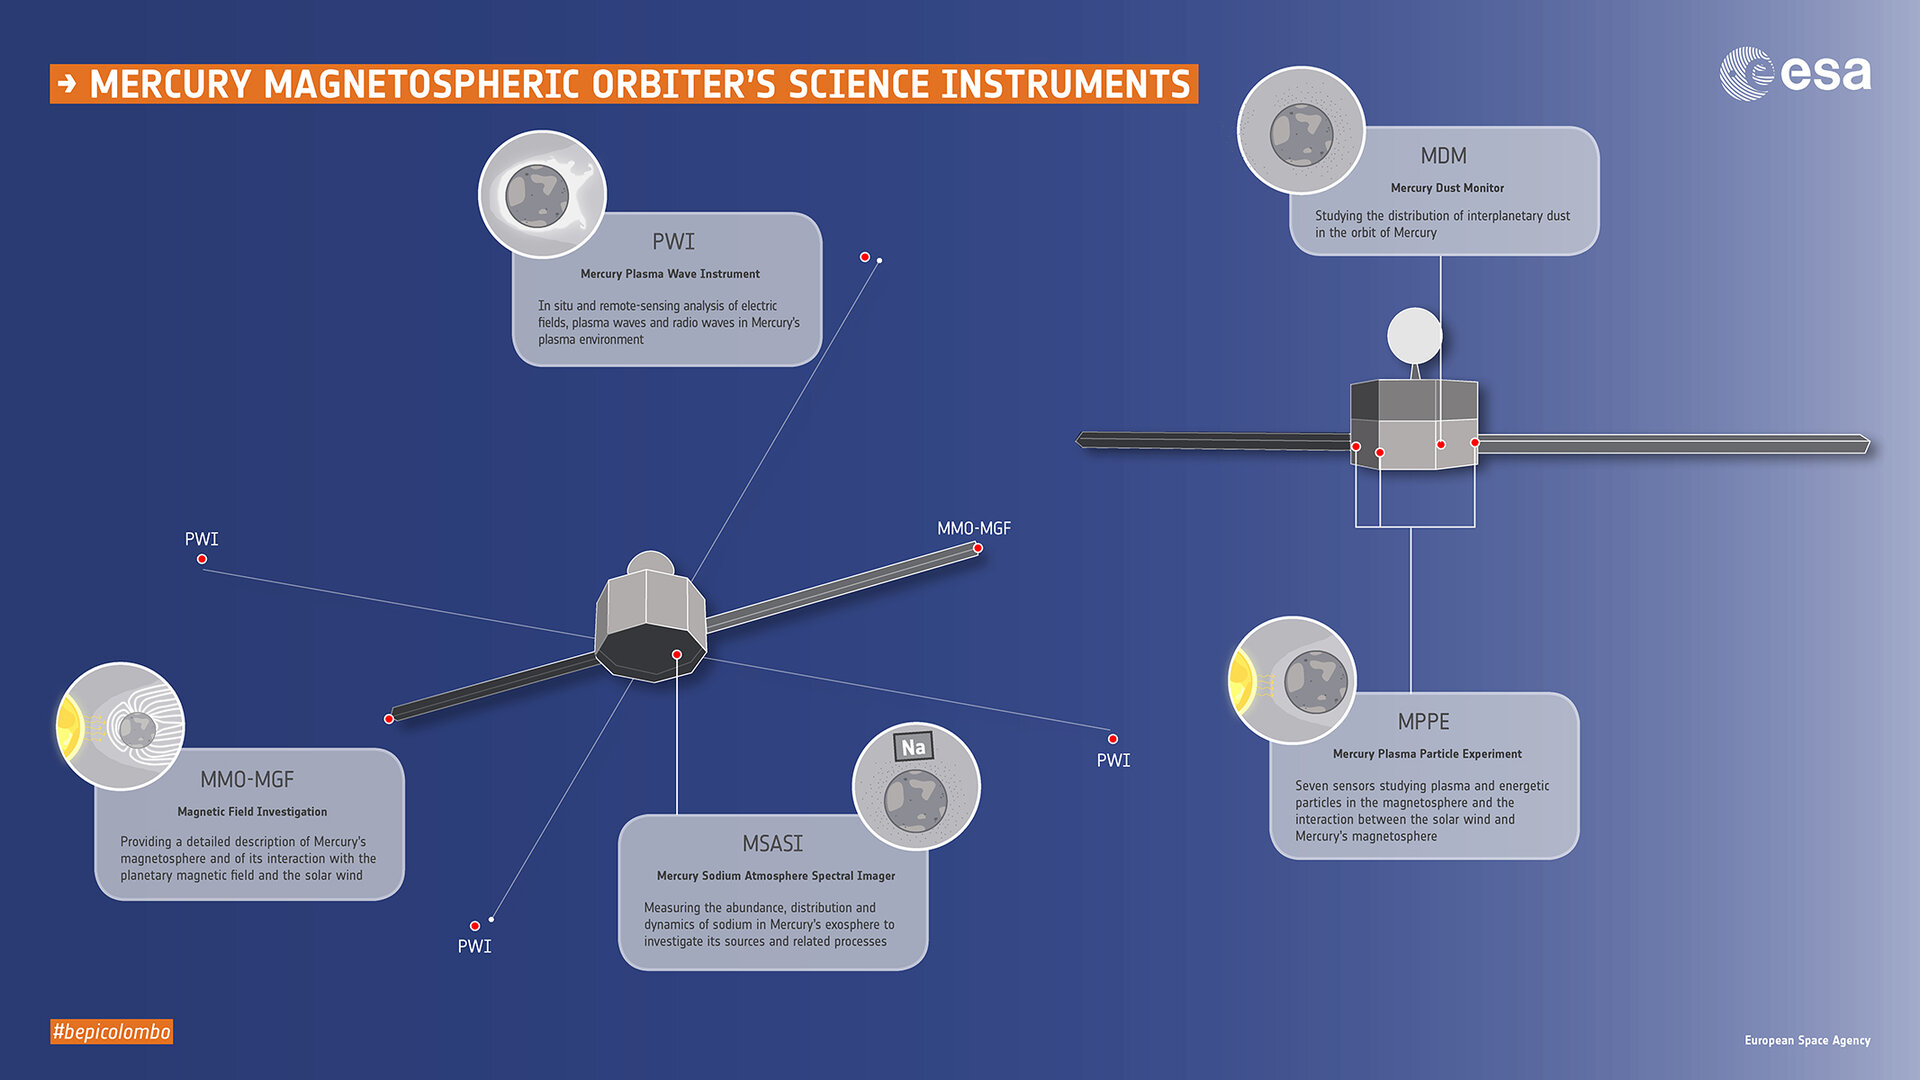 MMO’s science instruments